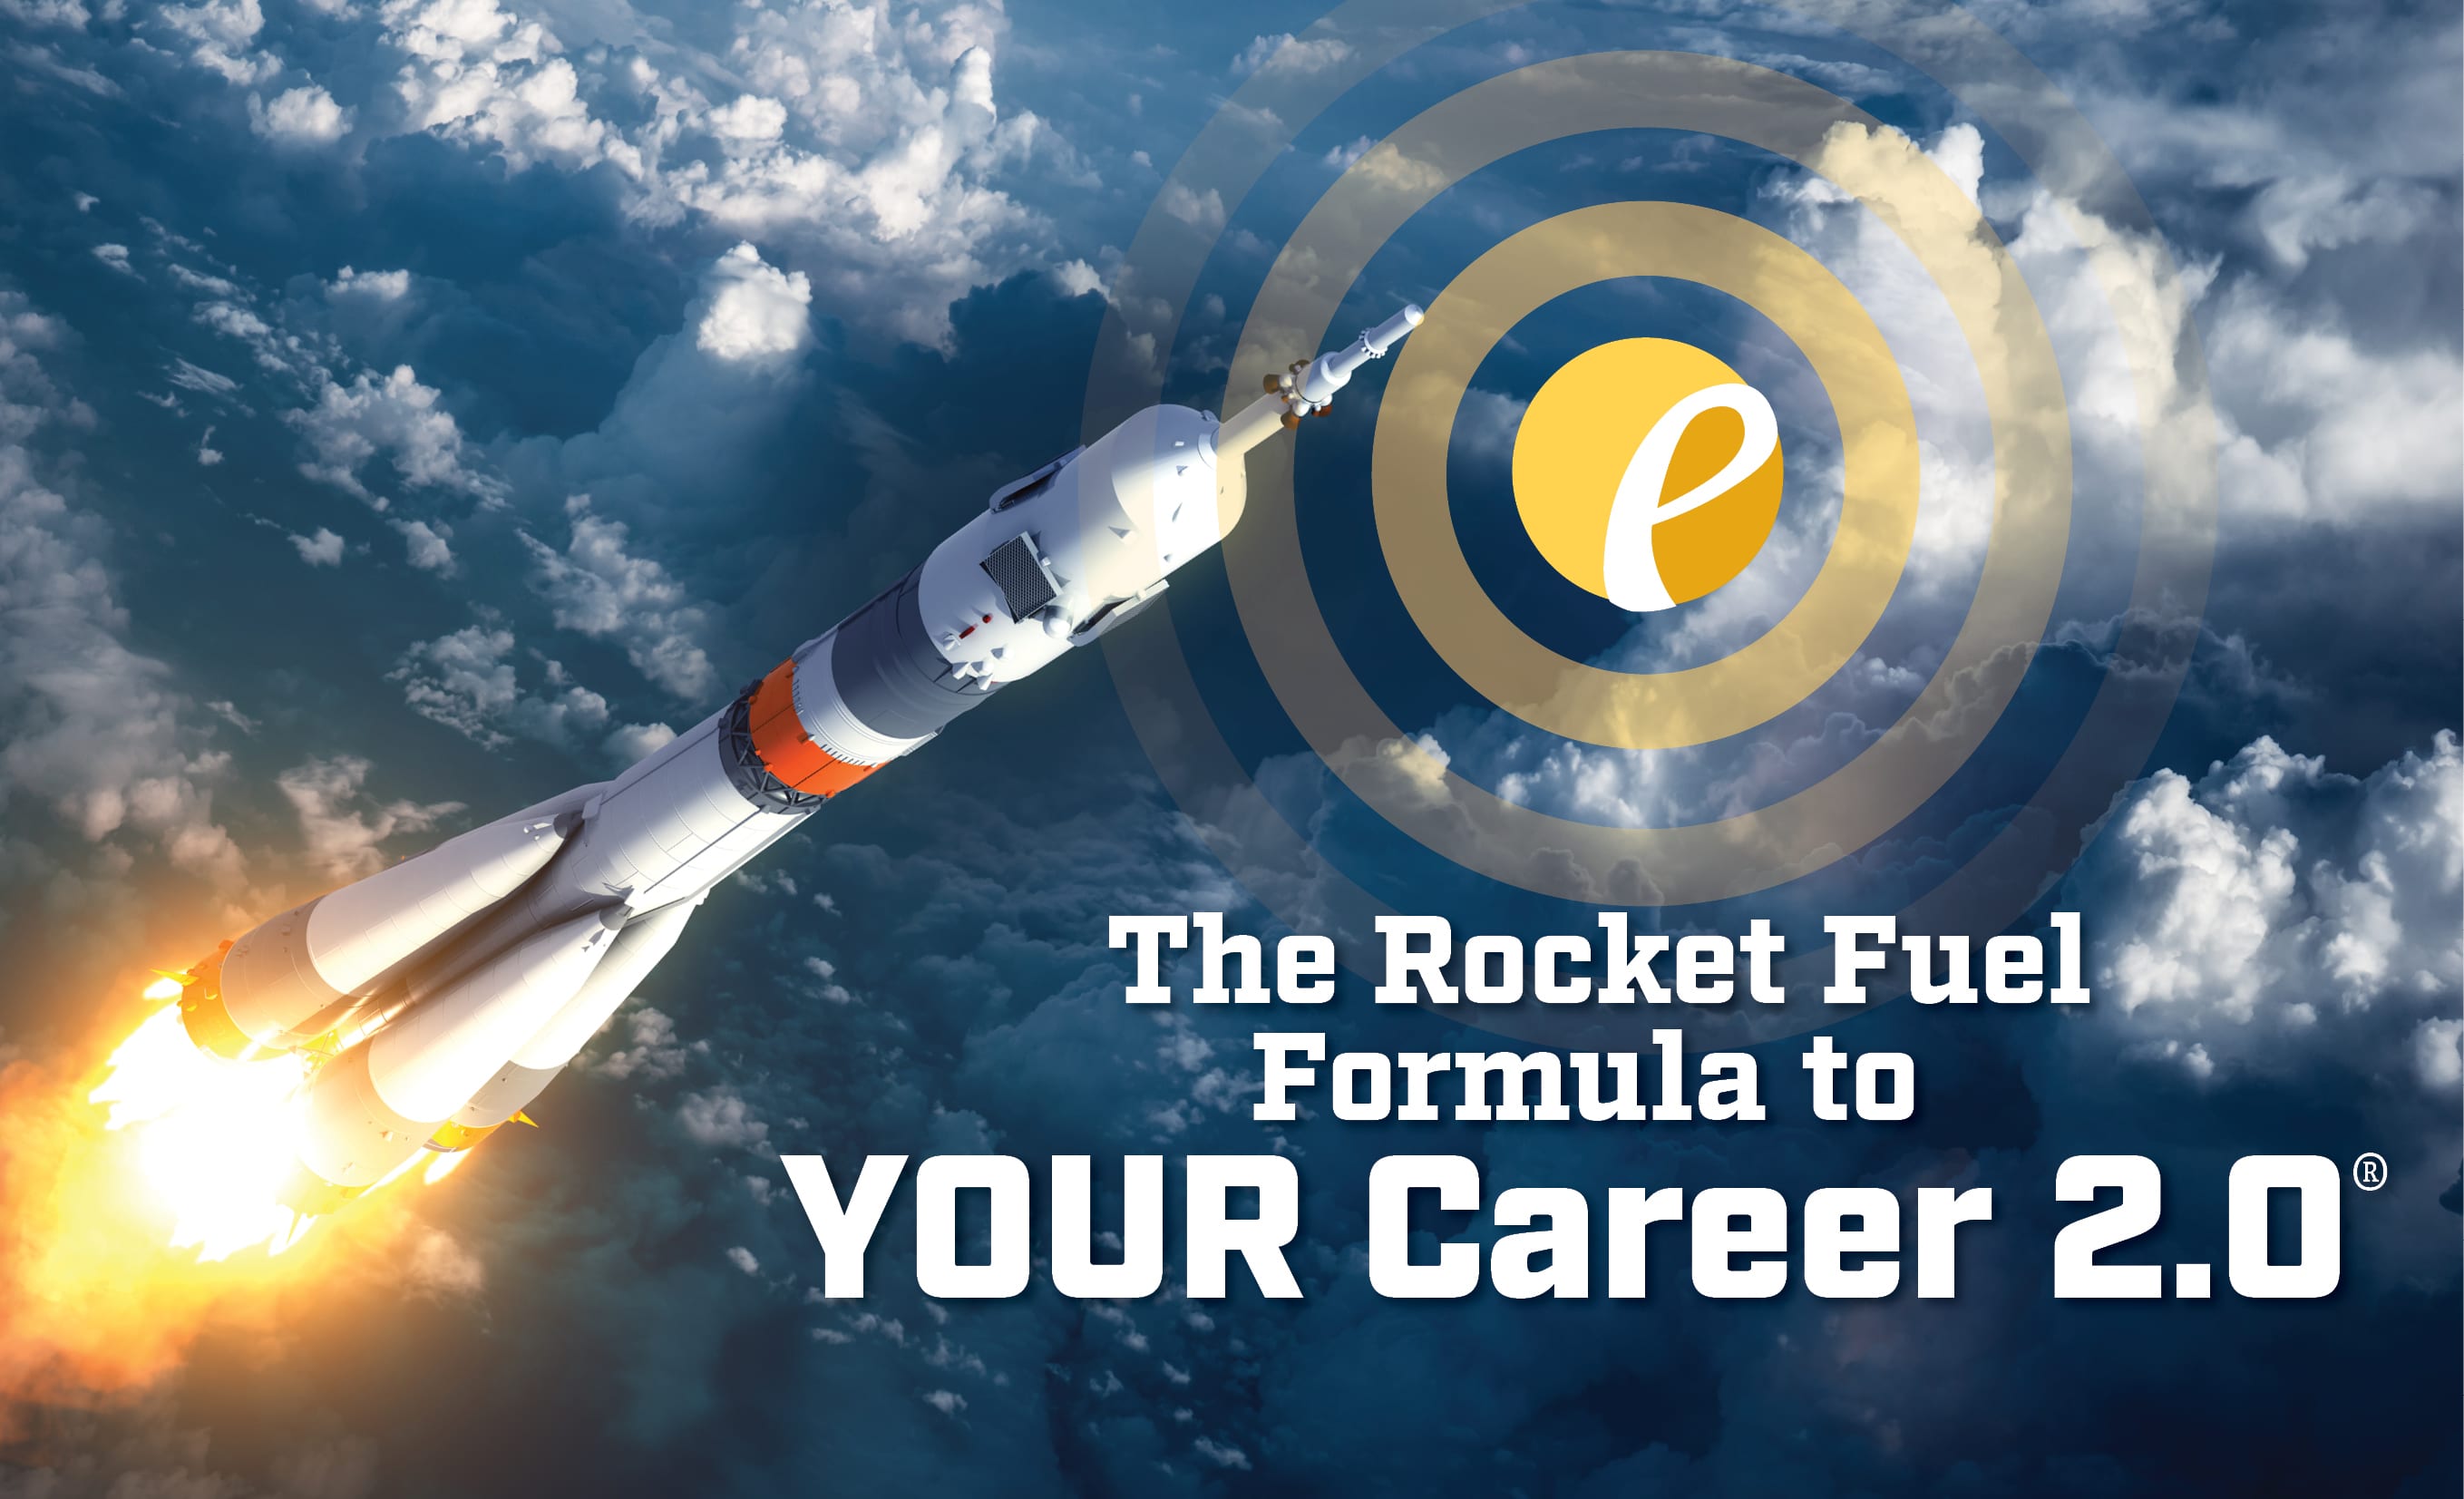 photo of rocket in a blue sky with The Rocket Fuel Formula to Your Career 2.0 text